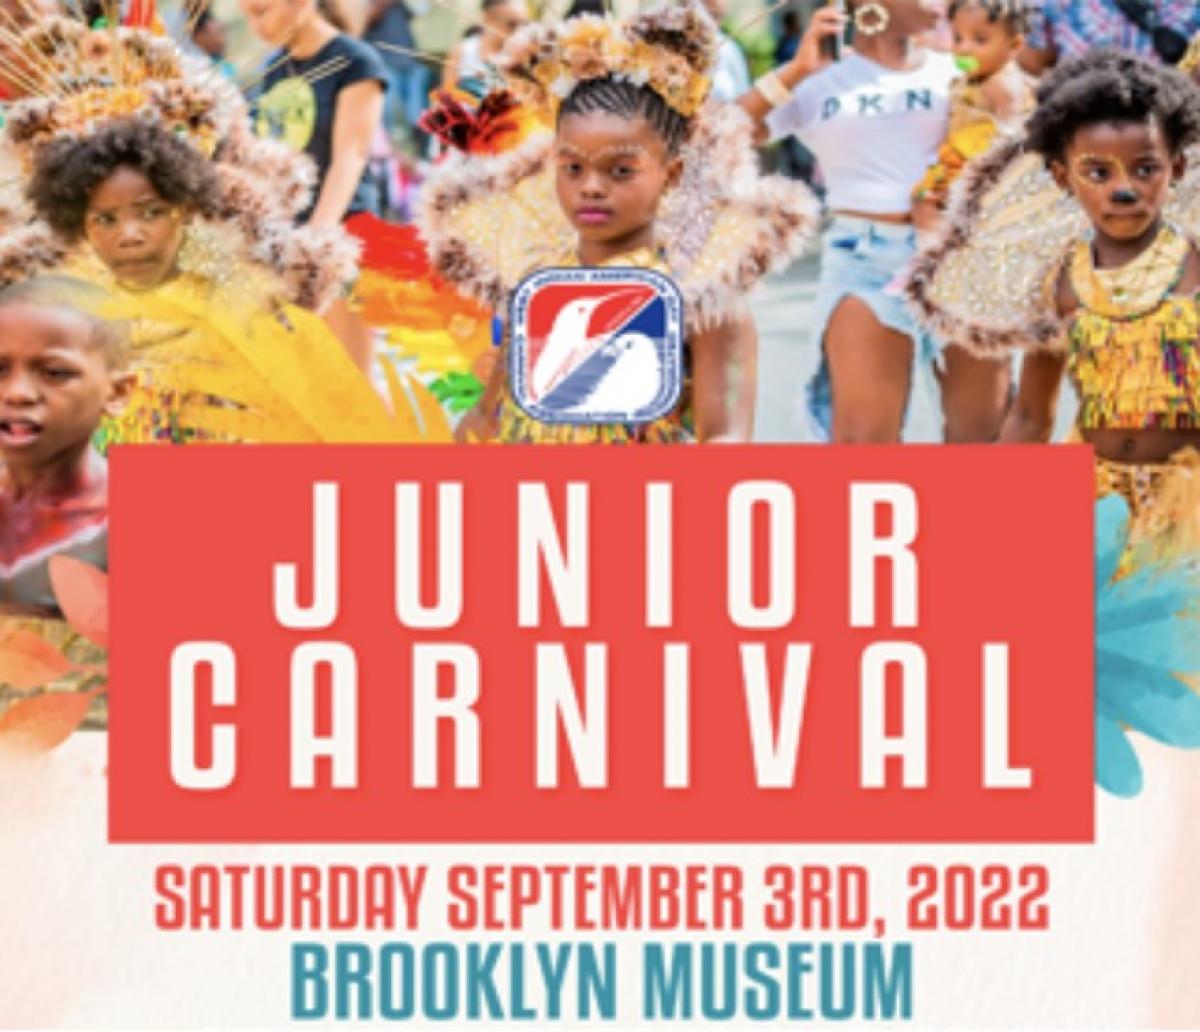 Junior Carnival Parade flyer or graphic.